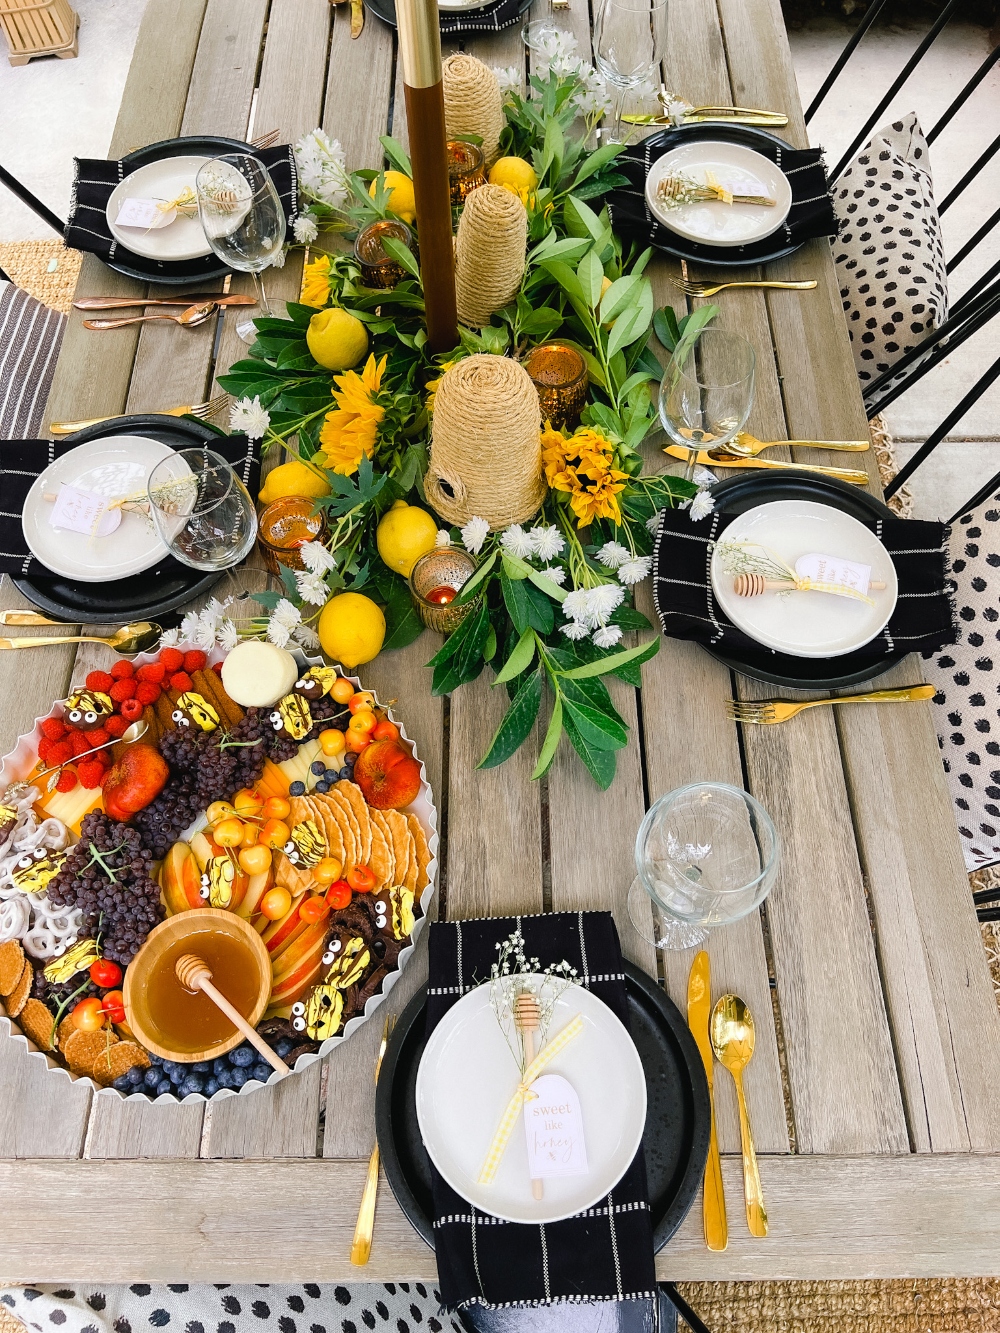 Summer Honey-Themed Outdoor Dining. Celebrate warm weather and summer with a honey-themed dinner, handmade beehives, honey dipper gift and bee-themed dessert board!